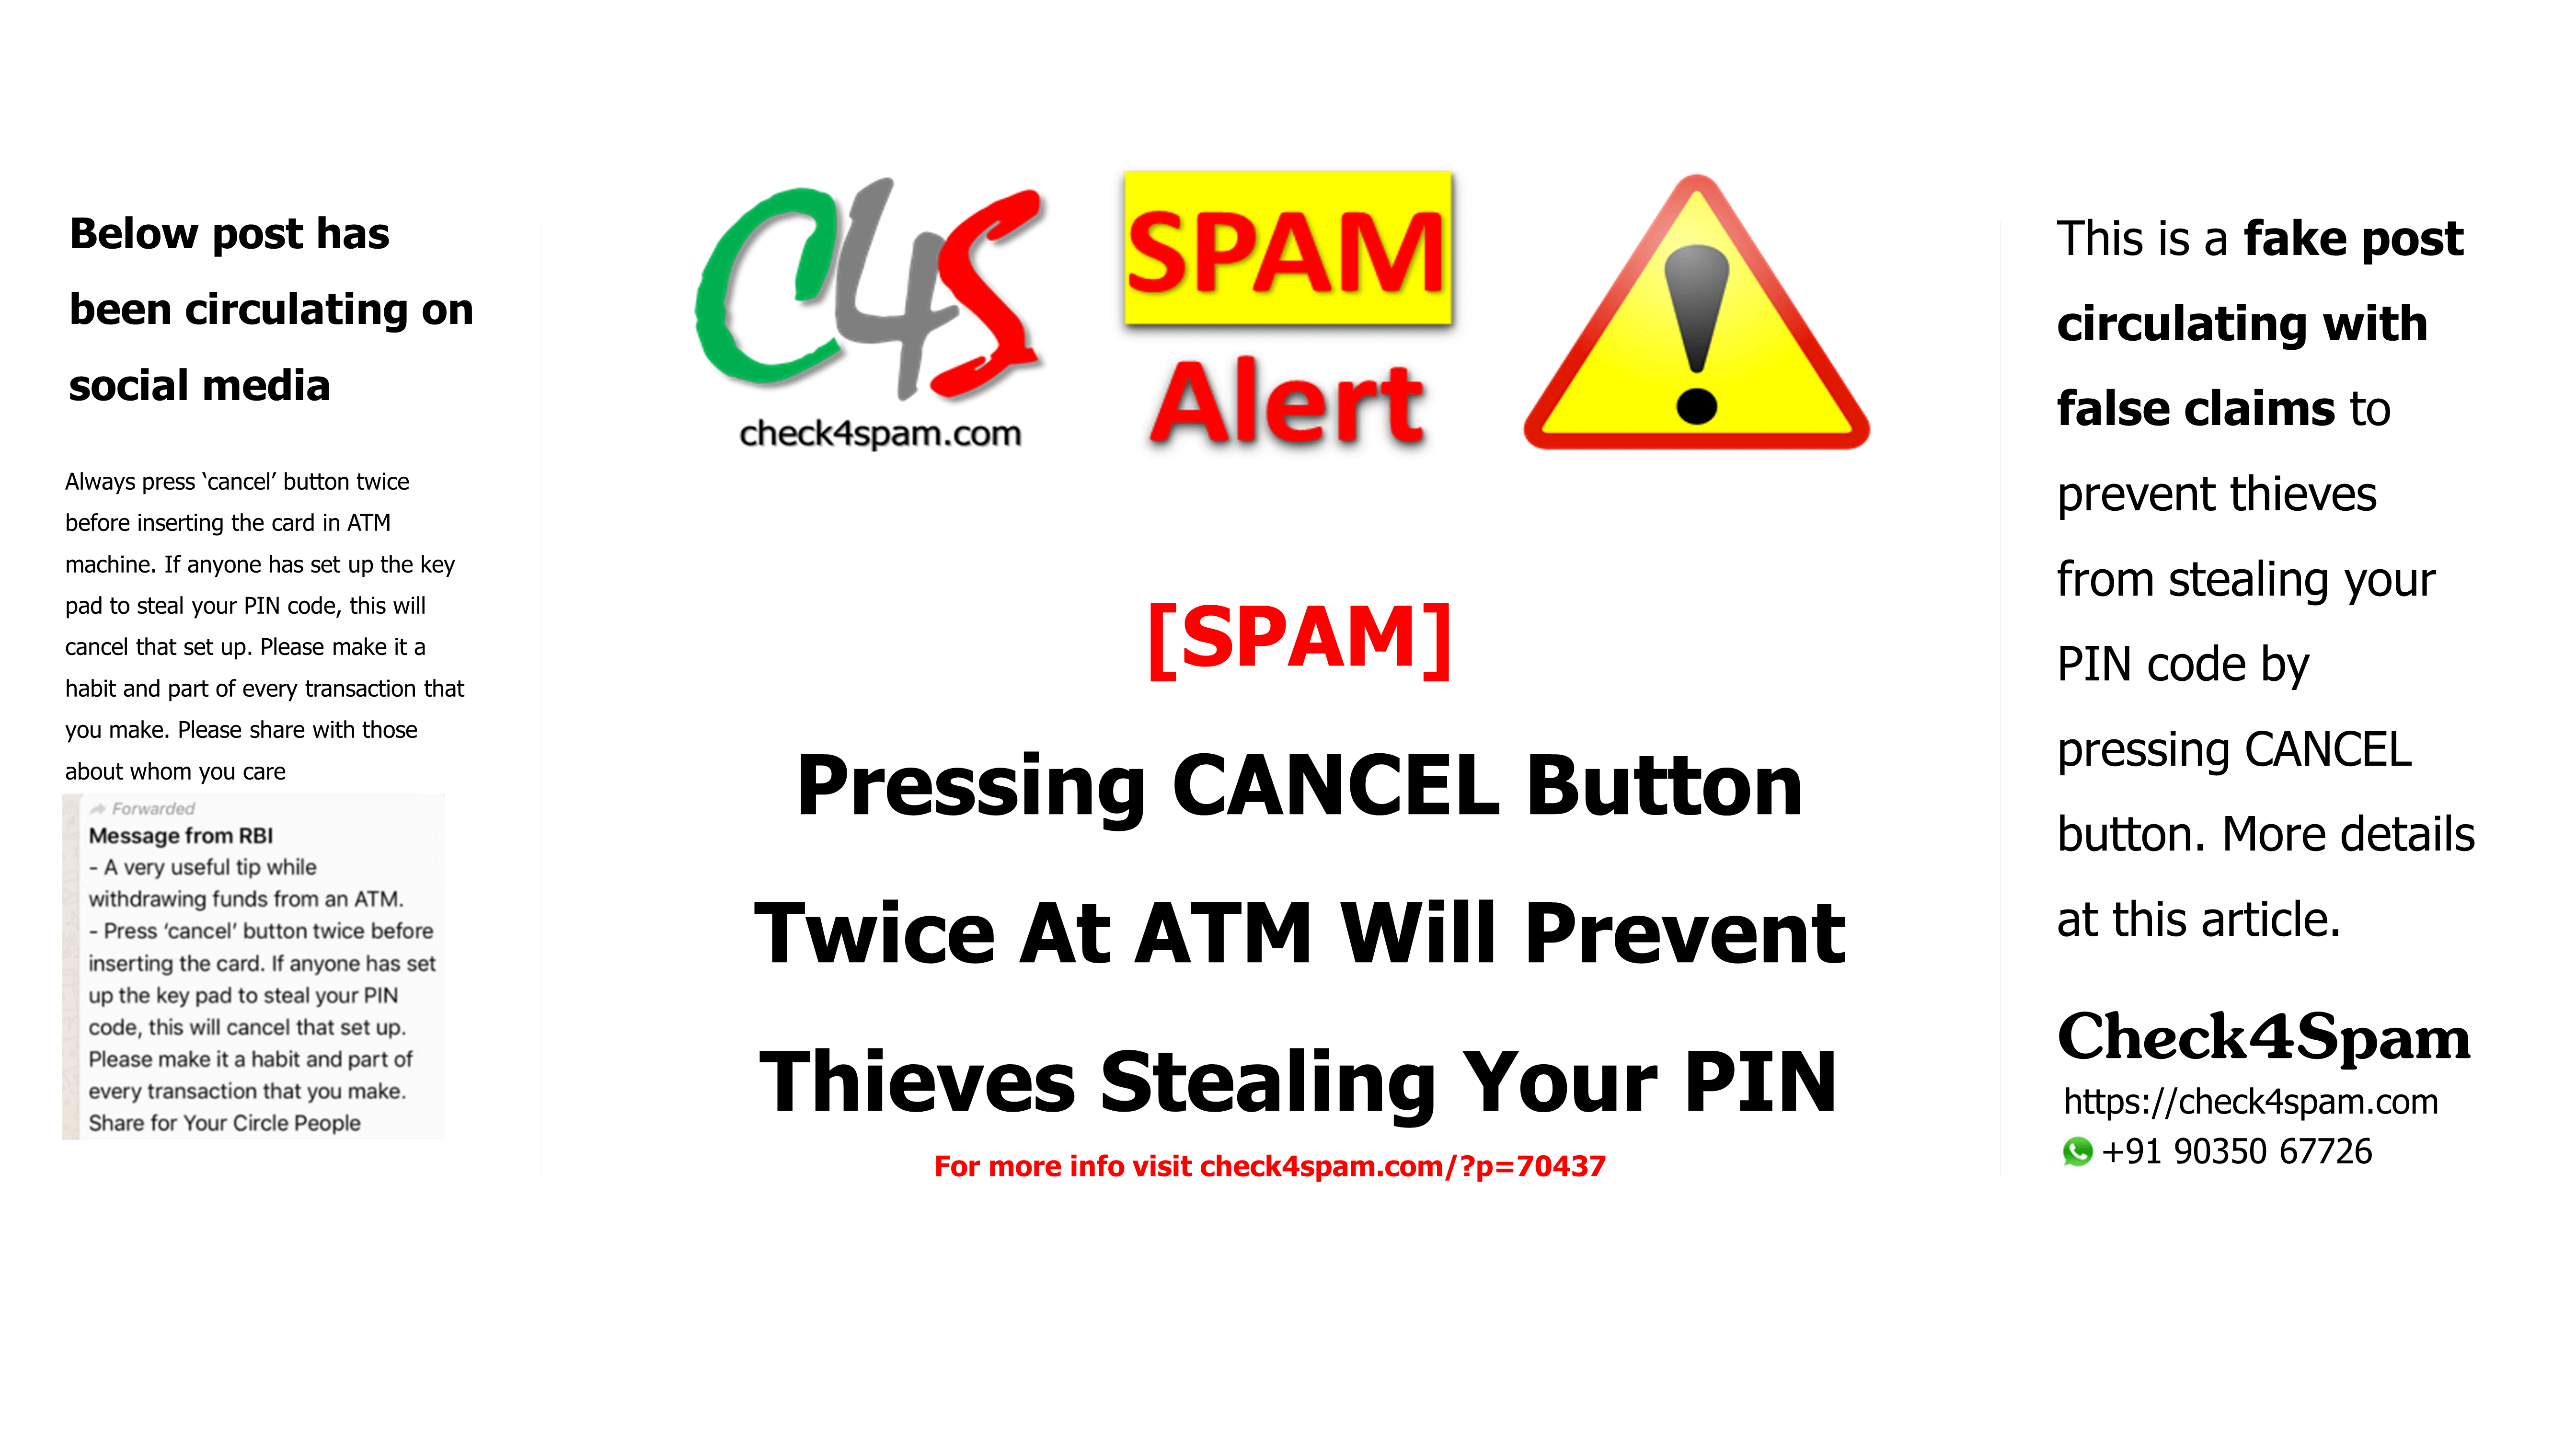 [SPAM] Pressing CANCEL Button Twice At ATM Will Prevent Thieves From Stealing Your PIN